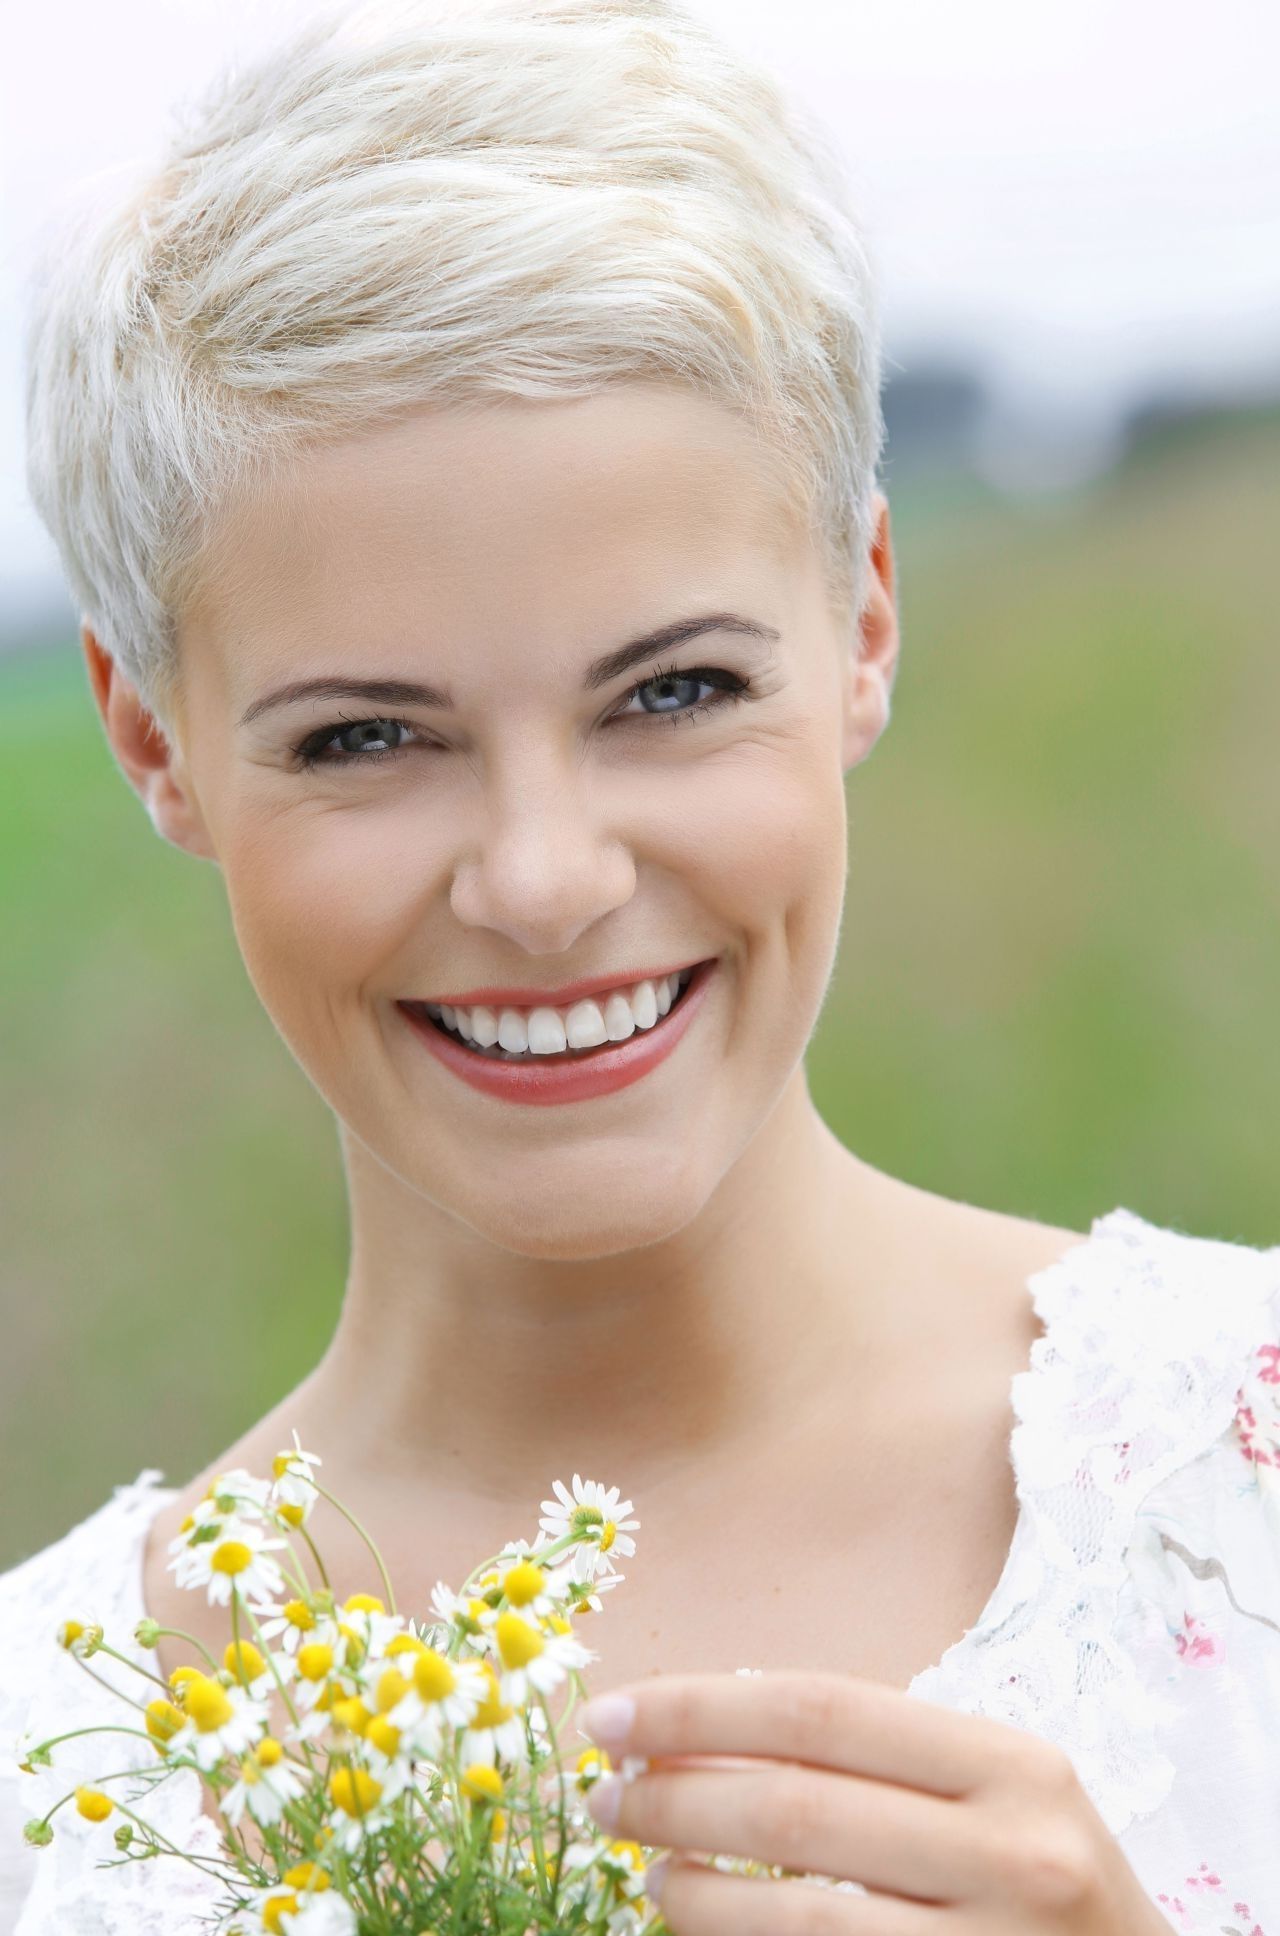 New Short Blonde Hairstyles | Short Hairstyle, Shorts And Short Pertaining To Latest Ultra Short Pixie Hairstyles (Photo 8 of 15)